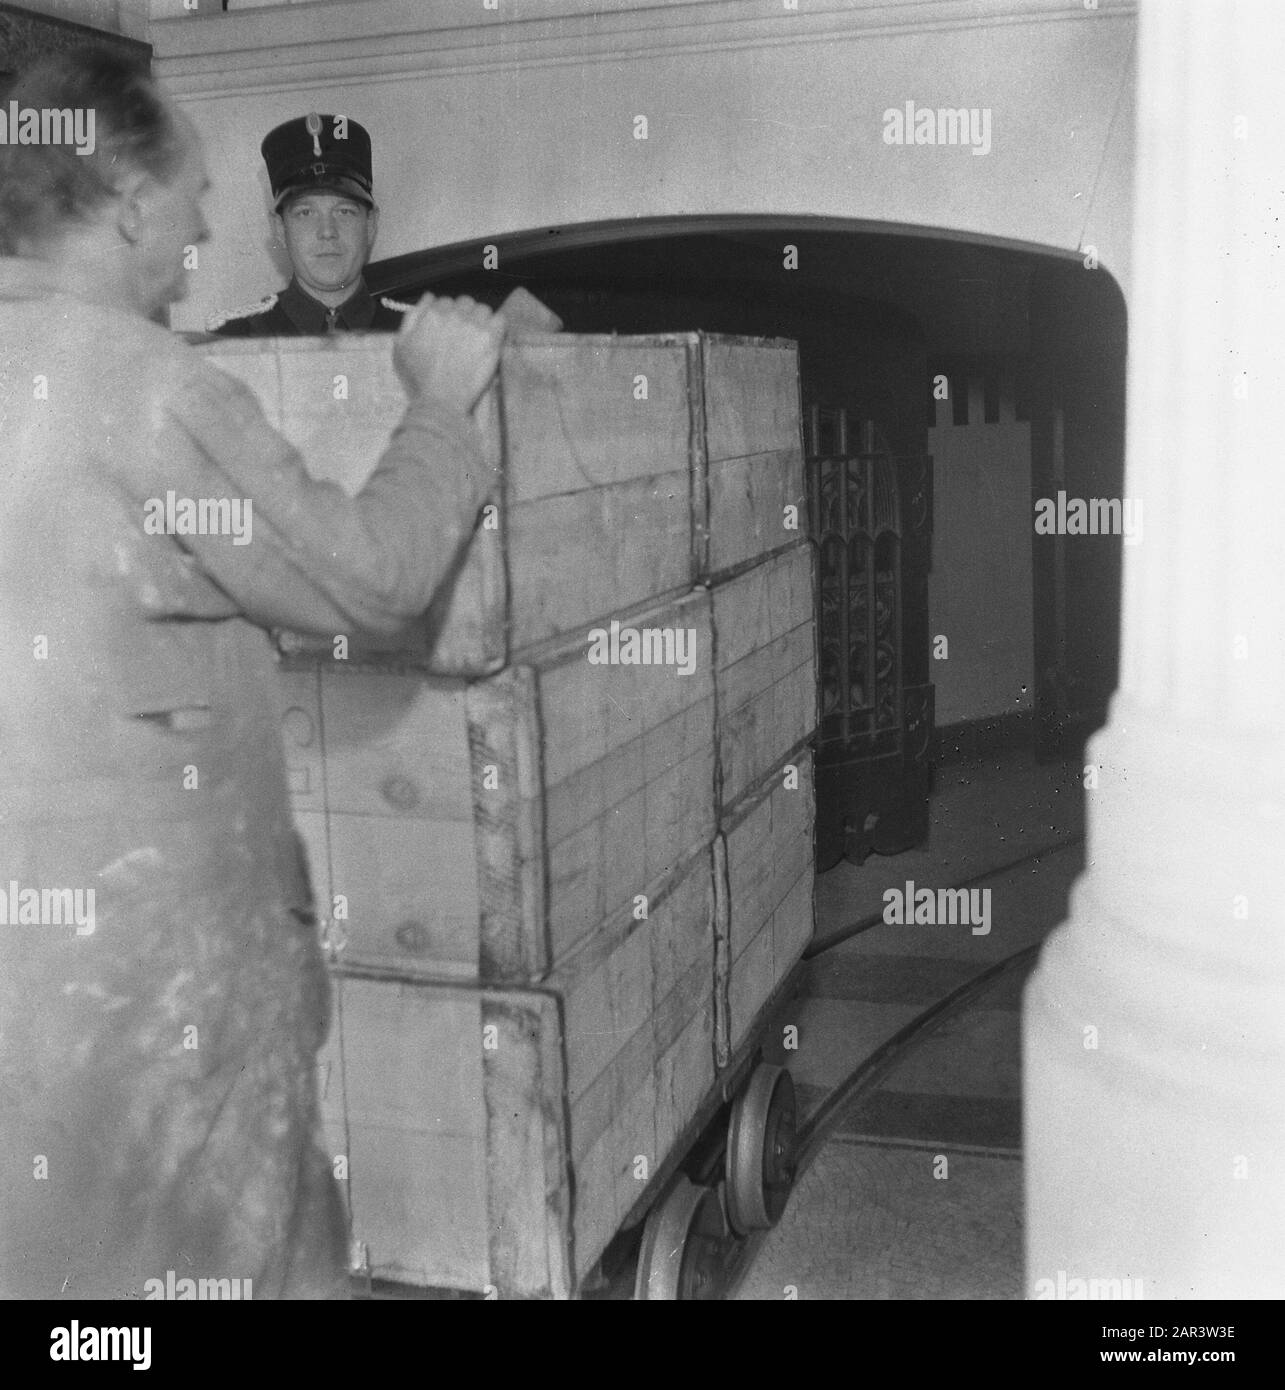 Finance: New money Nederlandsche Bank  Chests are run into a corridor on narrow-gauge track, supervised by a marechaussee Date: 1945 Location: Amsterdam Keywords: banks, finance Stock Photo